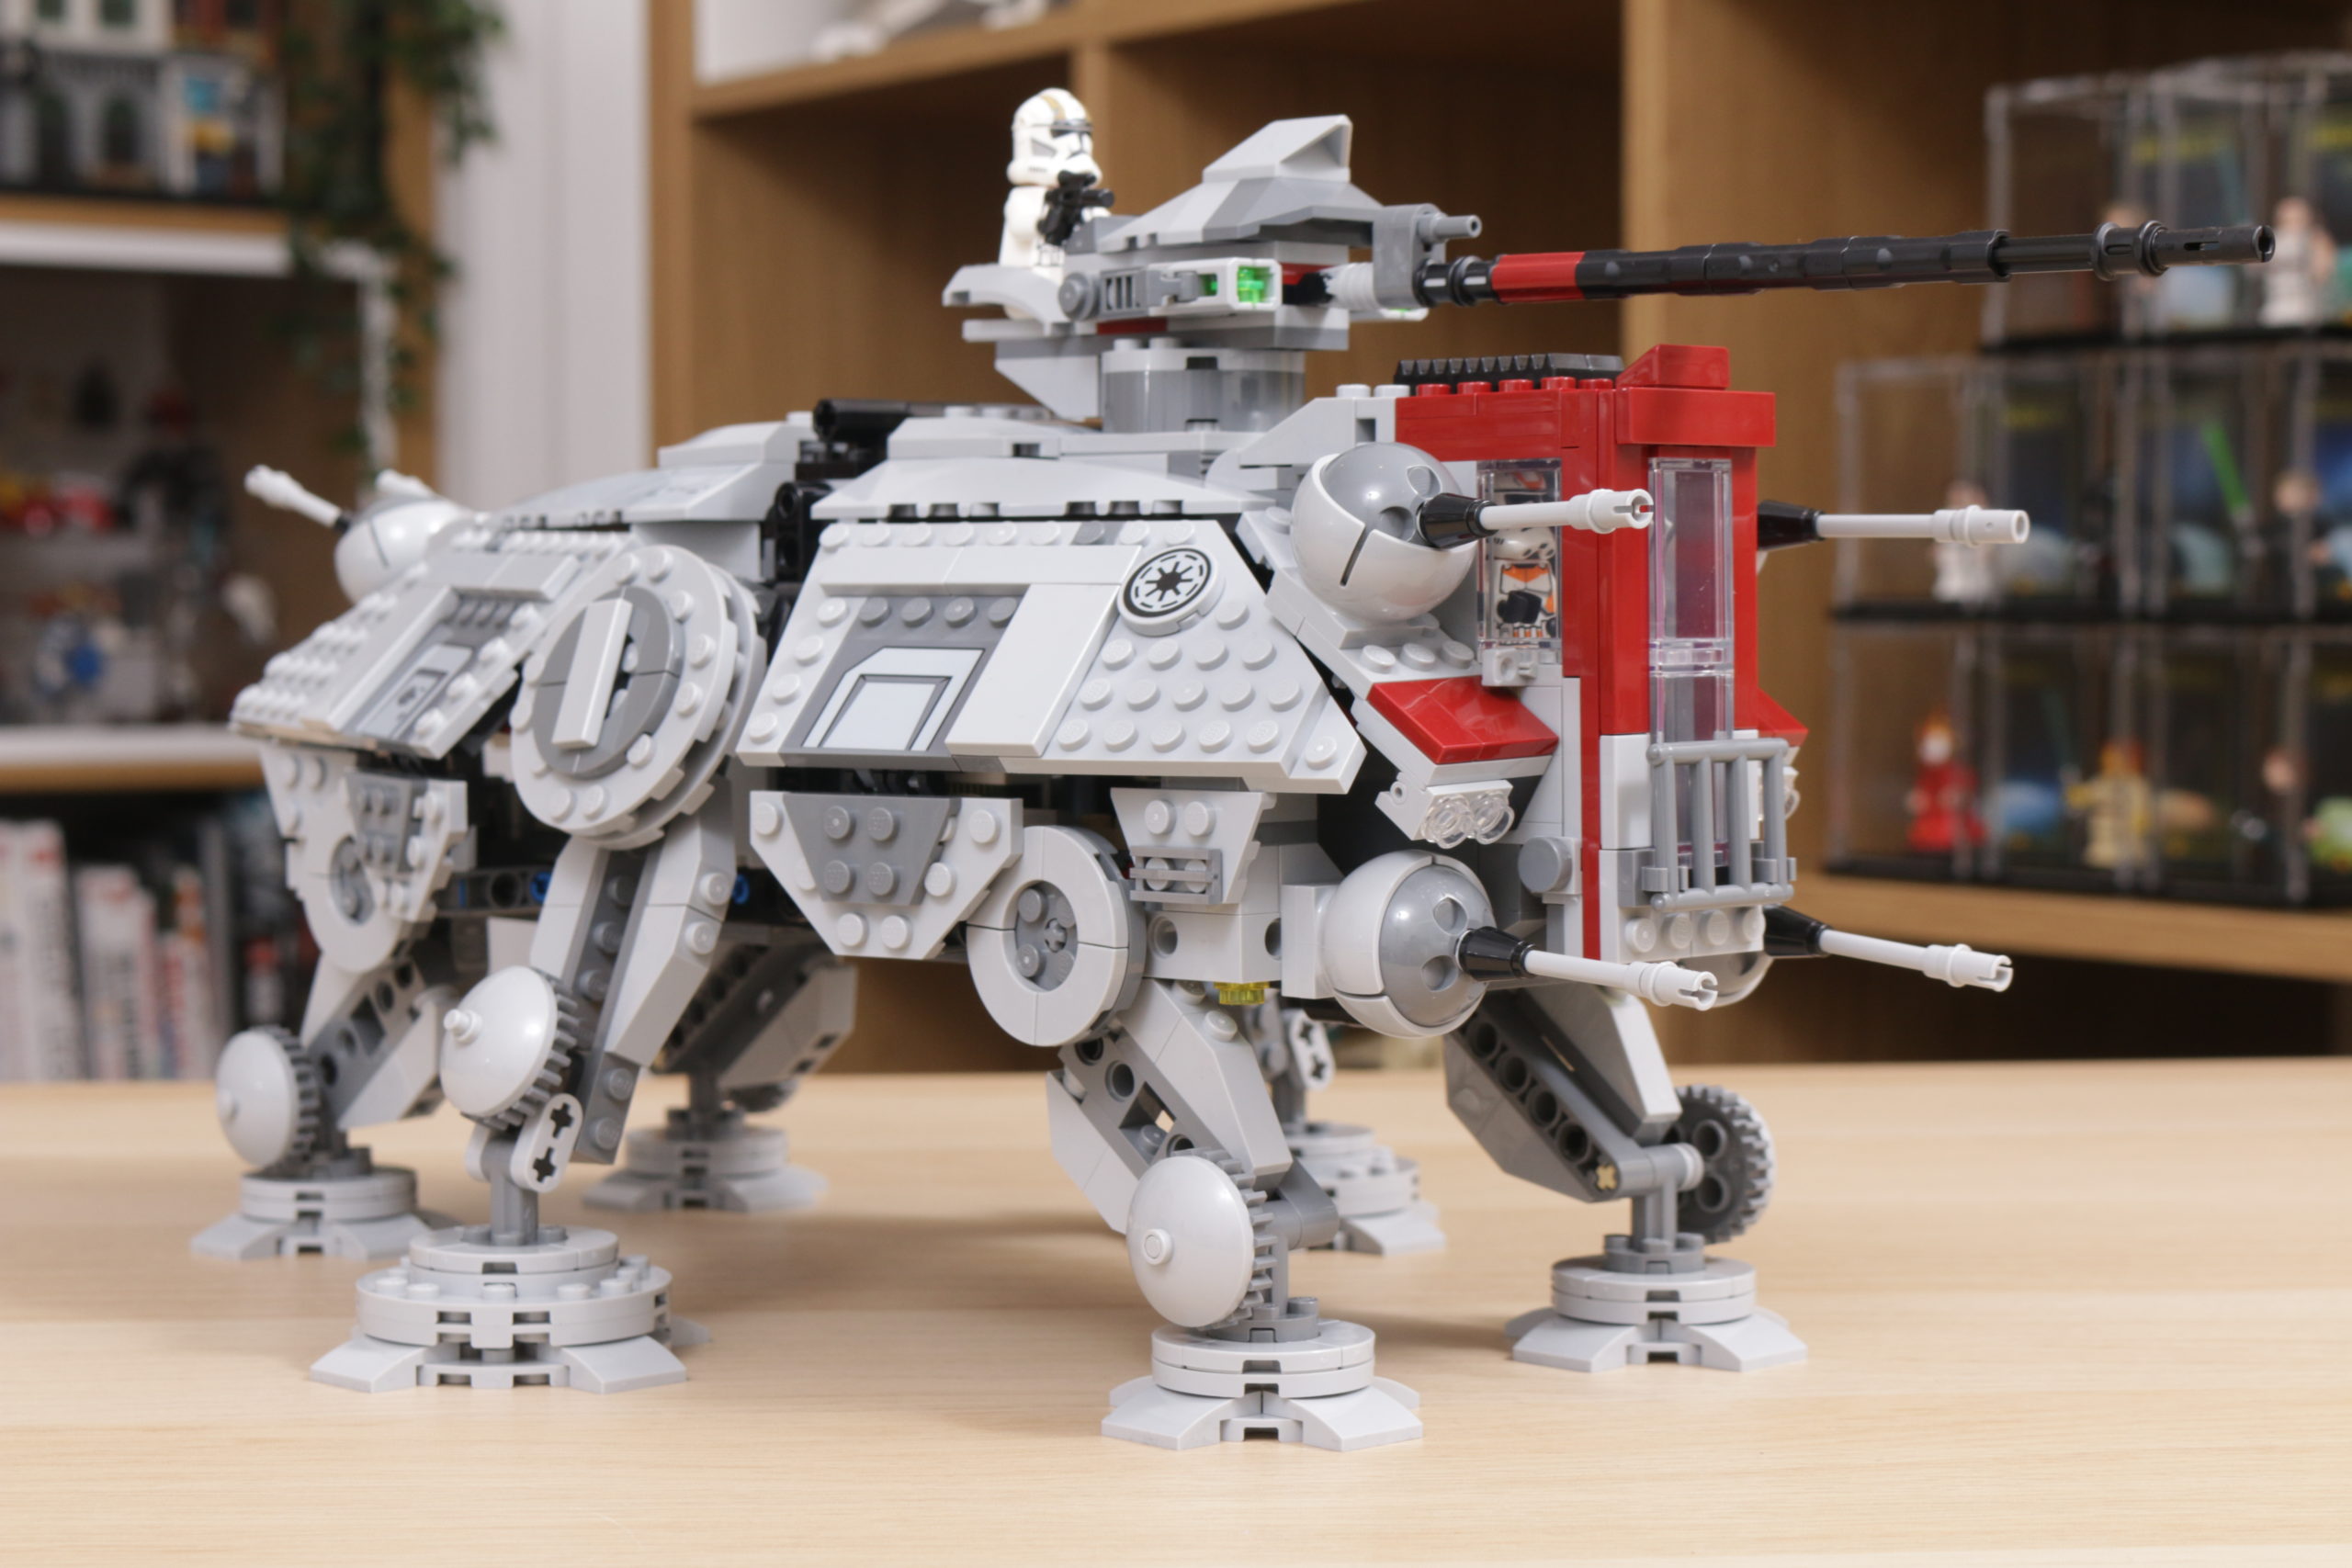 LEGO Star Wars 75337 AT-TE Walker review and gallery